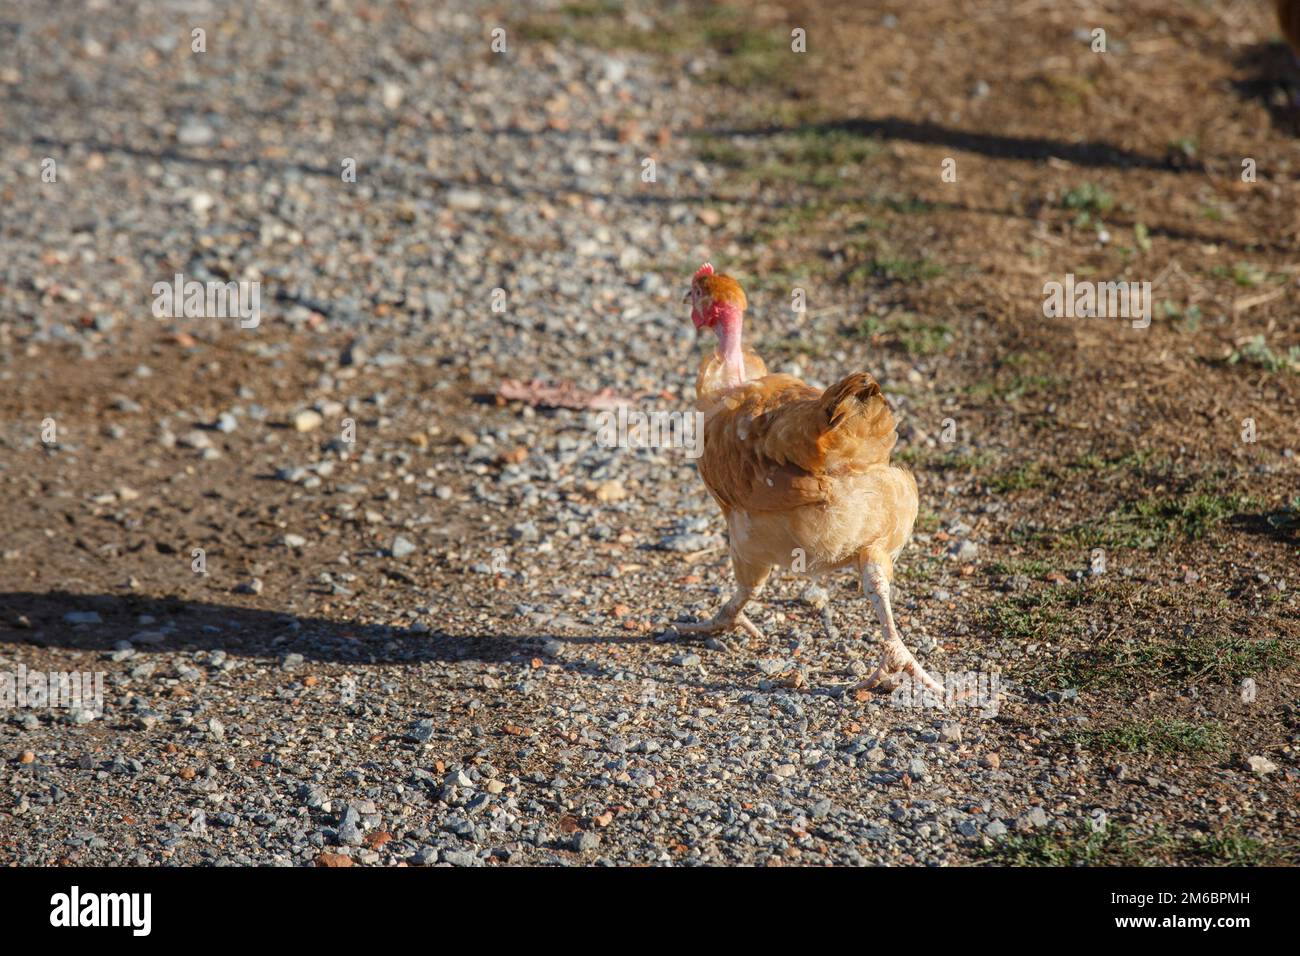 Closeup on chicken running freely in a lush green paddock Stock Photo